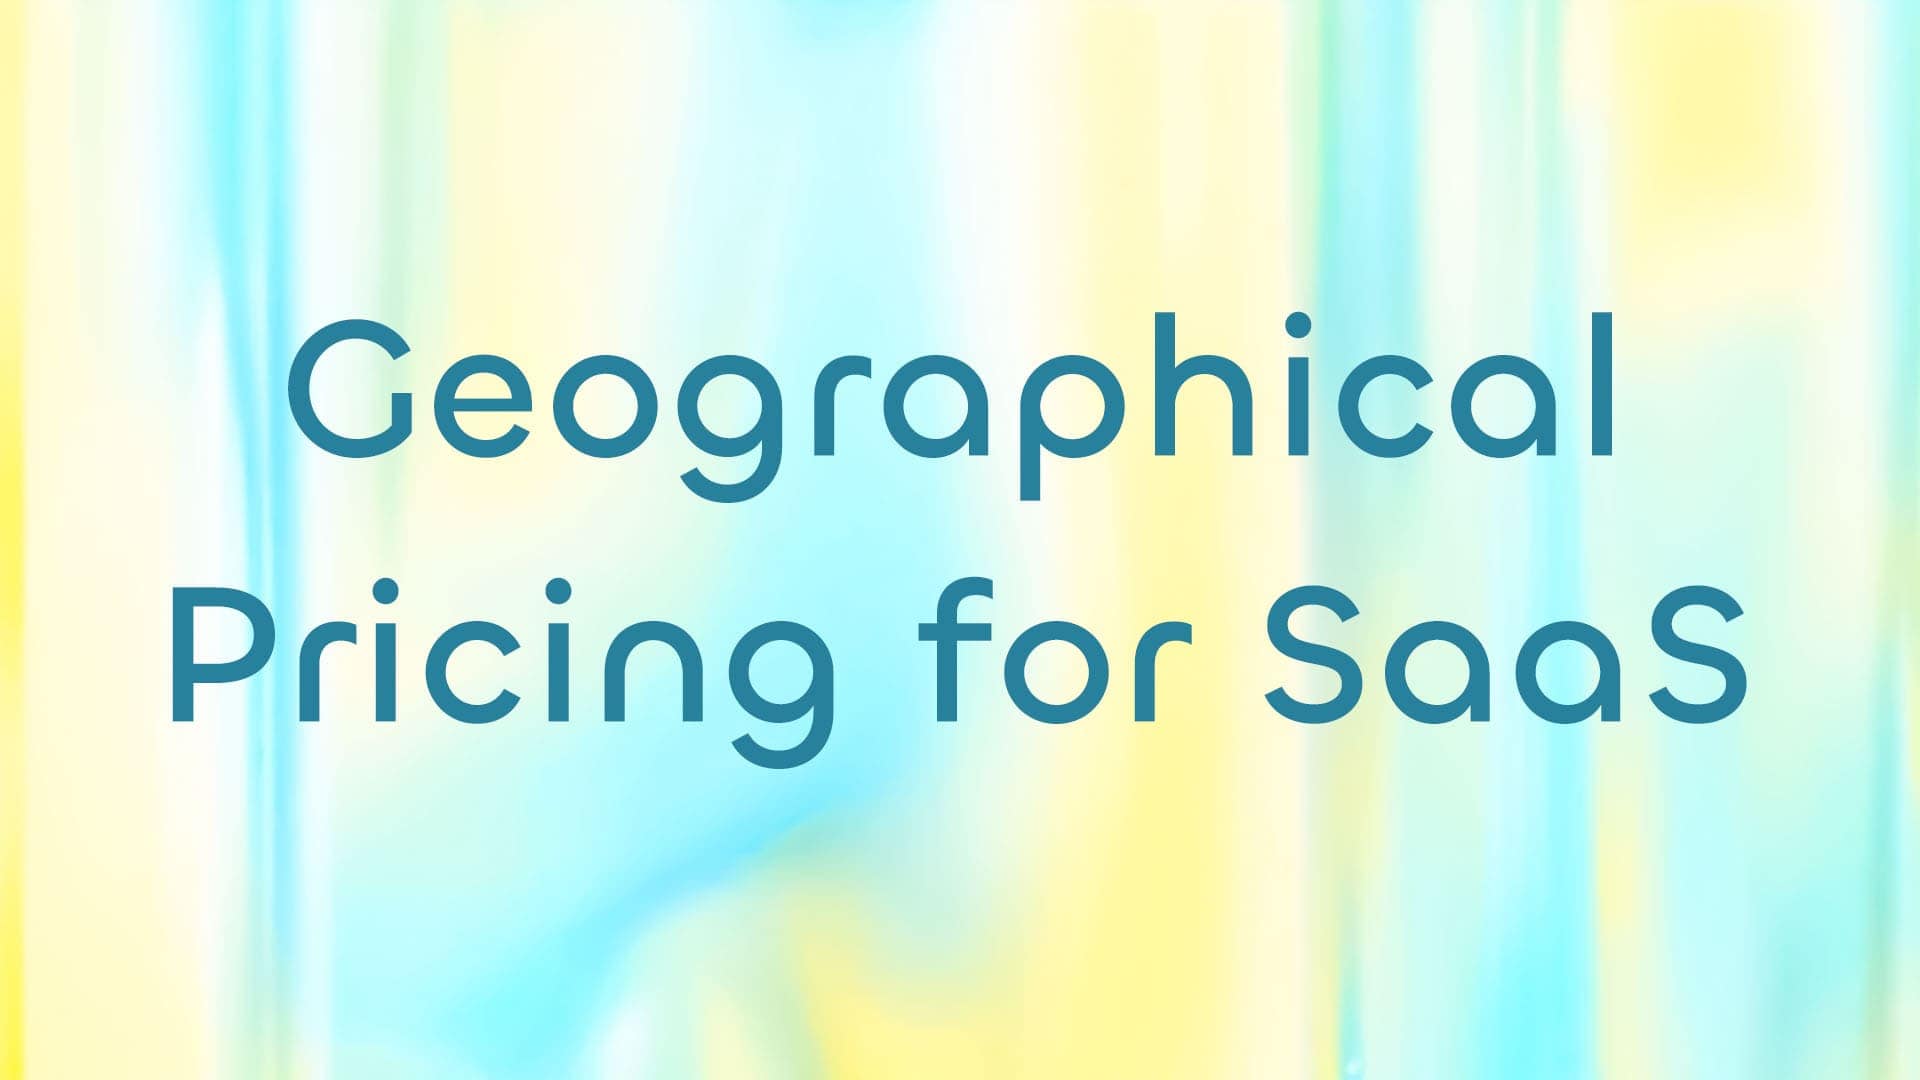 <span style="display: inline-block; margin-bottom: 0.5rem; font-weight: 500;">Geographical Pricing for SaaS</span><br>How to take digital business worldwide?